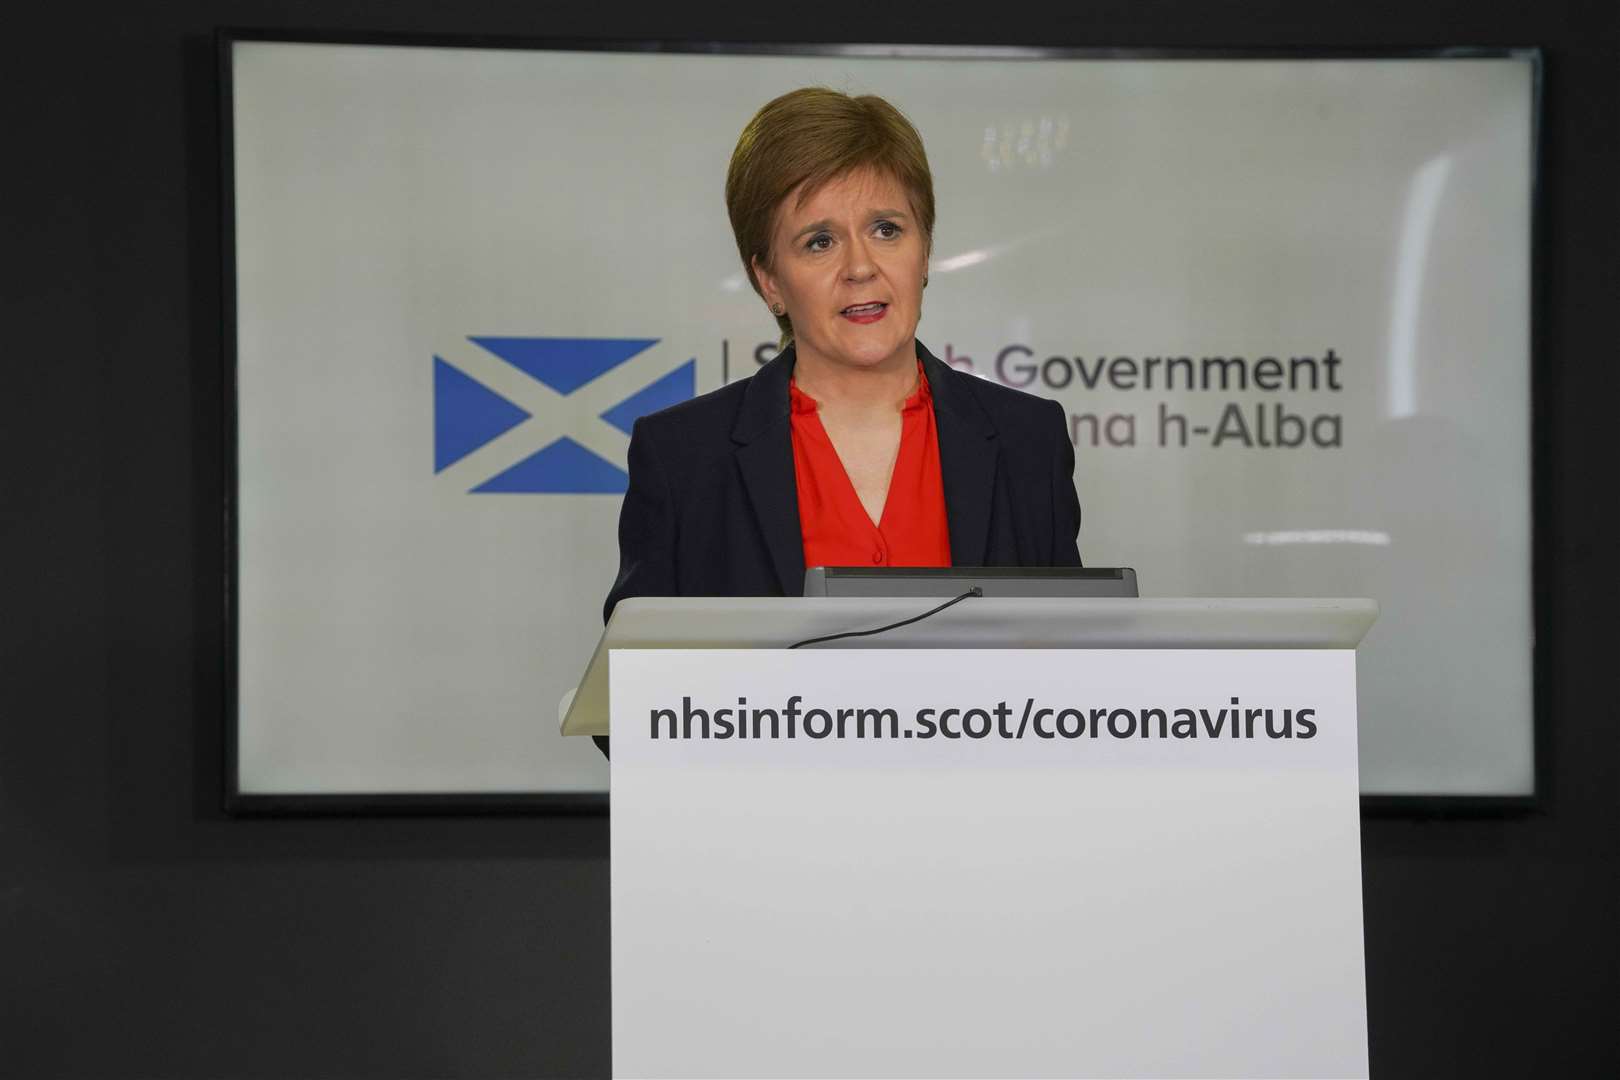 First Minister Nicola Sturgeon has warned that progress towards easing lockdown restrictions will be 'careful, gradual and incremental'.